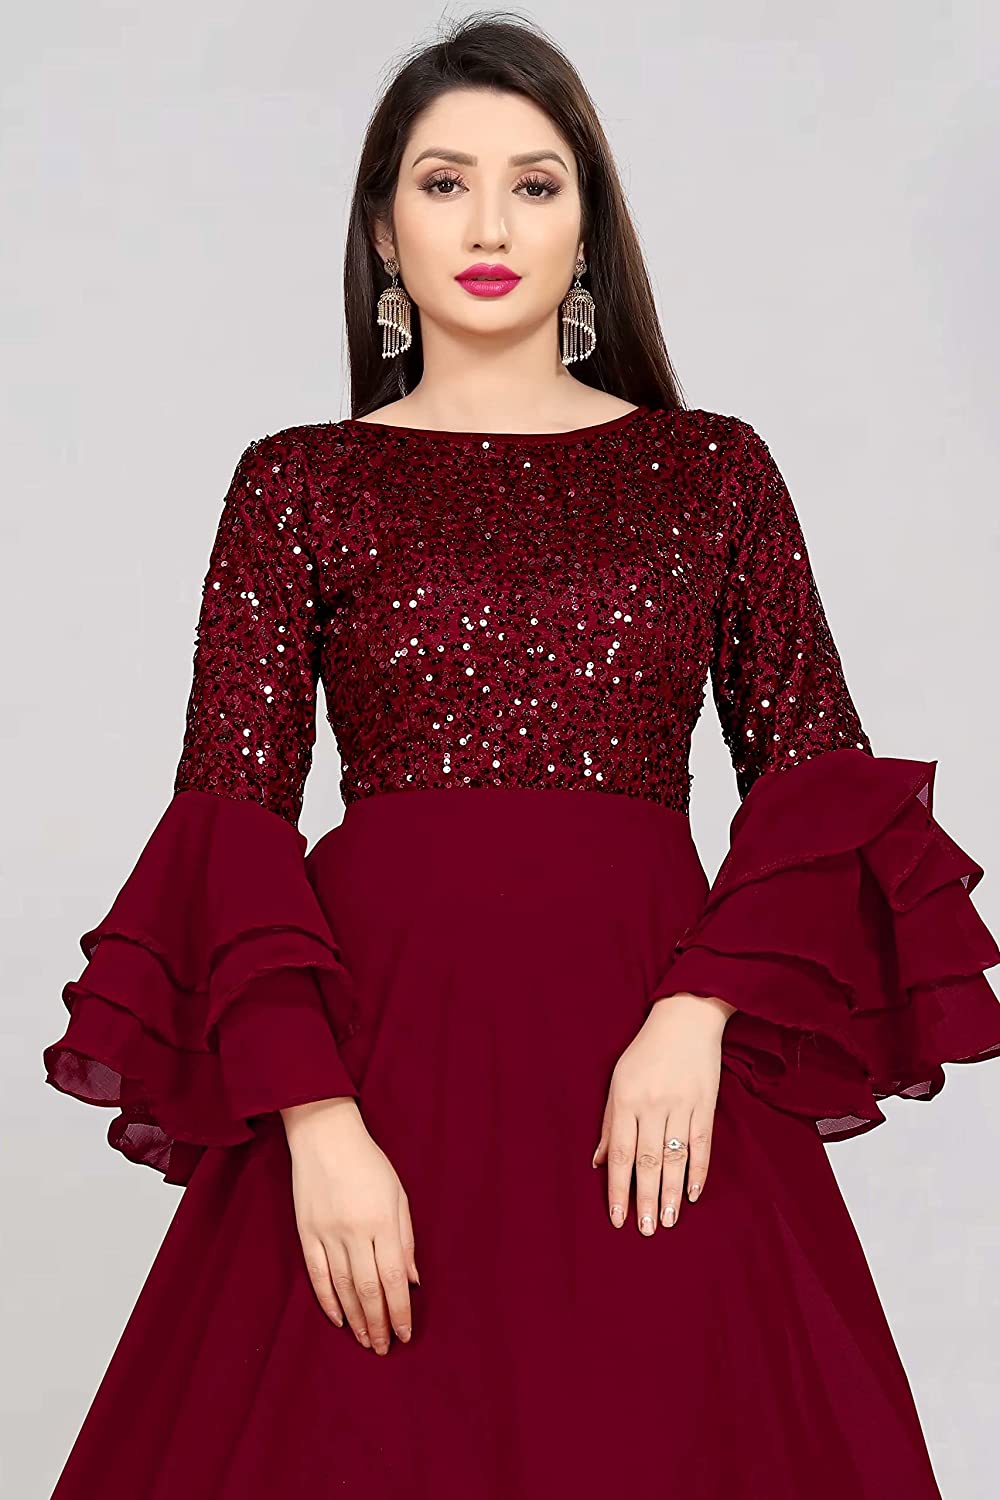 FIBREZA Women's Georgette Traditional Ethnic Long Sequins Embroidered Gown Western Dress with Round Neck Flare Sleeve Pattern -  Dresses in Sri Lanka from Arcade Online Shopping - Just Rs. 7199!